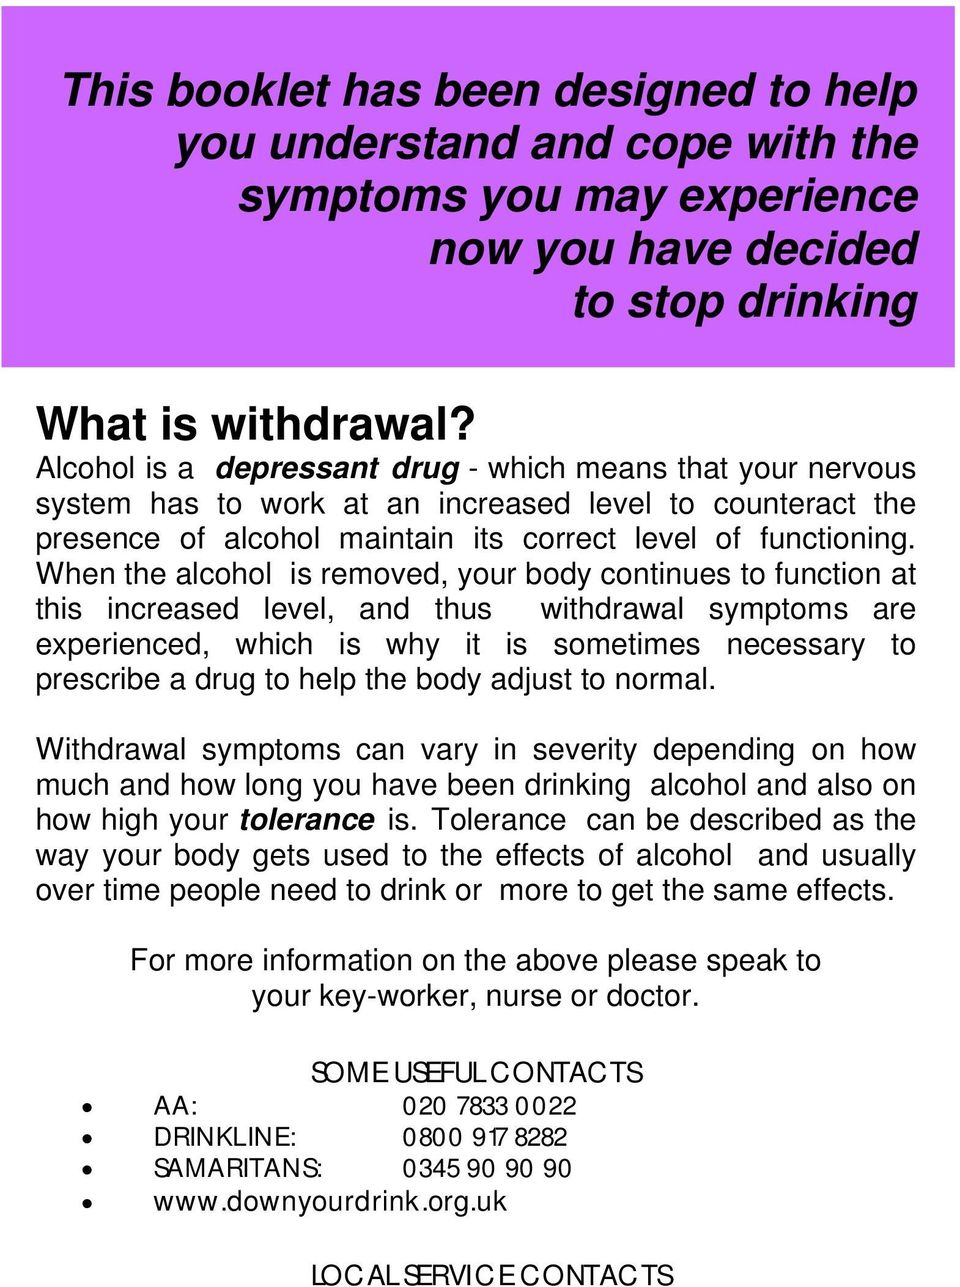 When the alcohol is removed, your body continues to function at this increased level, and thus withdrawal symptoms are experienced, which is why it is sometimes necessary to prescribe a drug to help